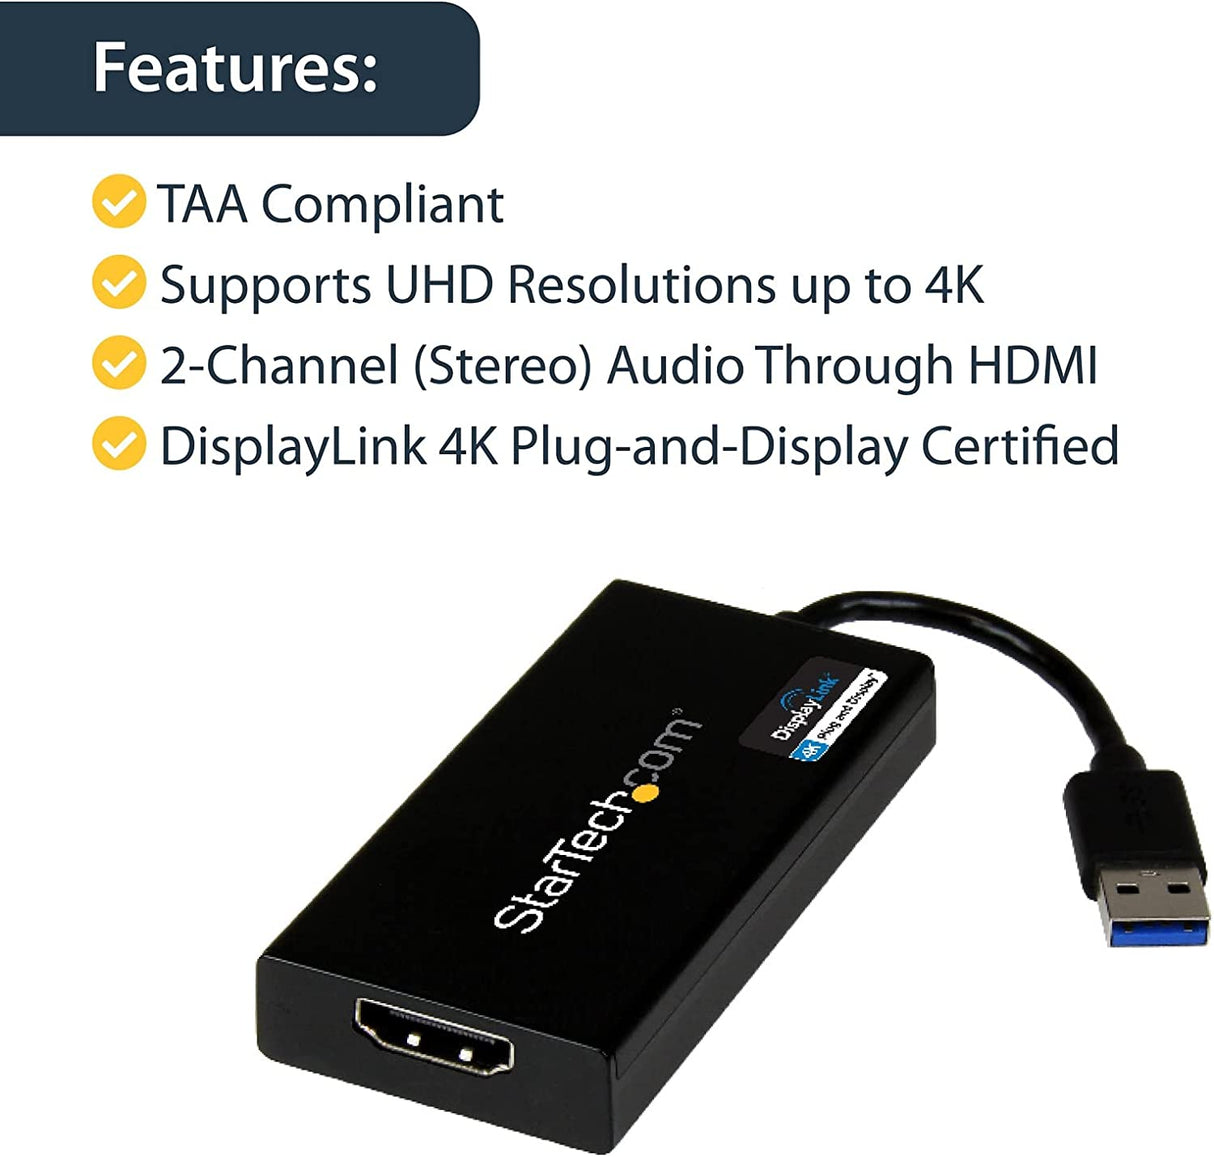 StarTech.com USB 3.0 to HDMI Adapter - 4K 30Hz Ultra HD - DisplayLink Certified - USB Type-A to HDMI Display Adapter Converter for Monitor - External Video &amp; Graphics Card - Mac &amp; Windows (USB32HD4K) USB 3.0 to HDMI 4K (Mac &amp; Win) Adapter